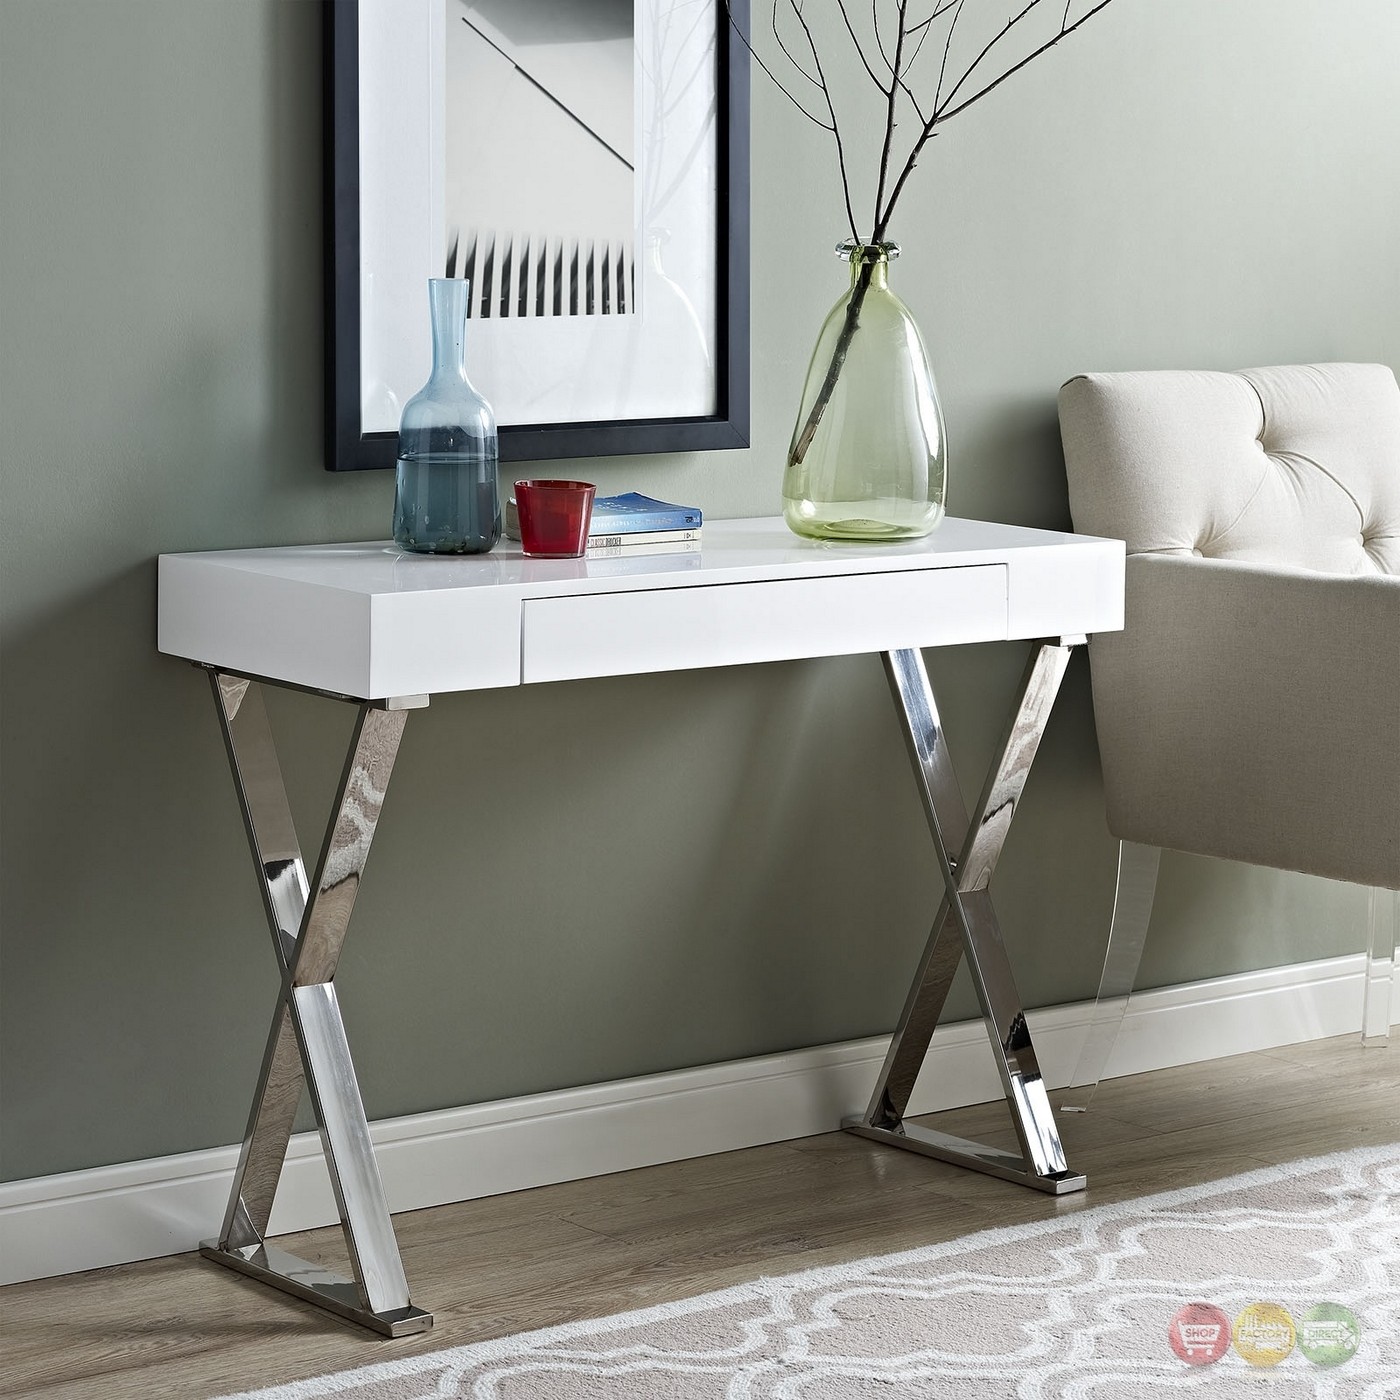 Sector modernistic console table with high gloss top